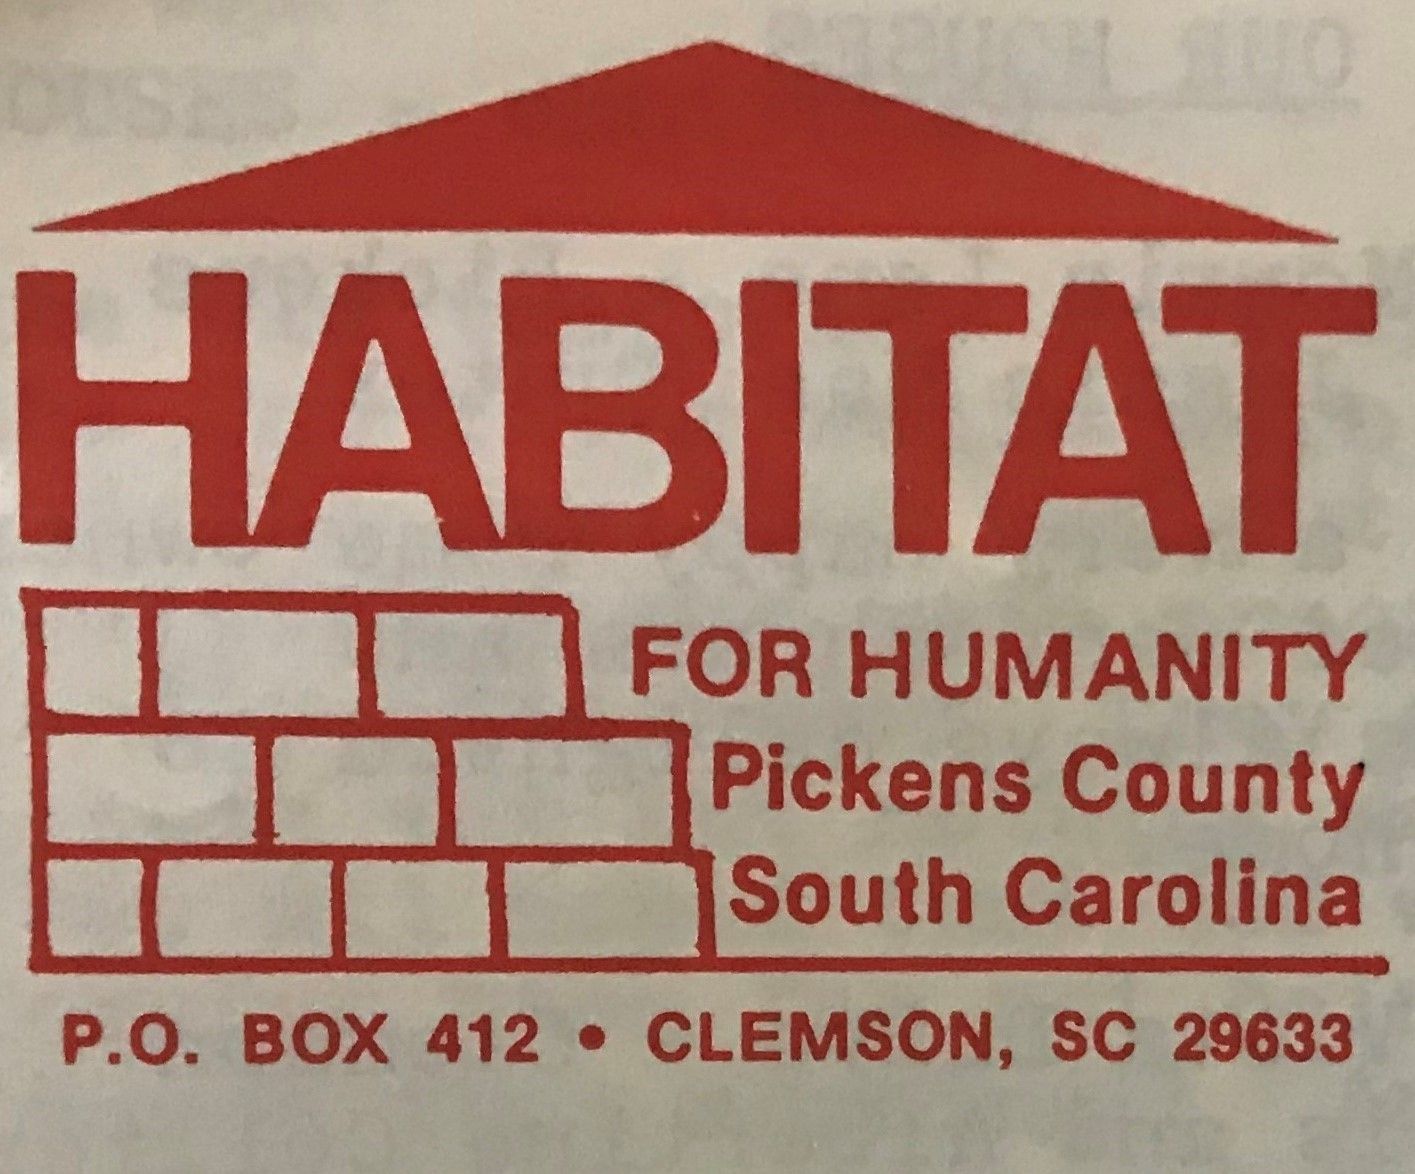 A red vintage Habitat for Humanity logo made of illustrated bricks and a roof.